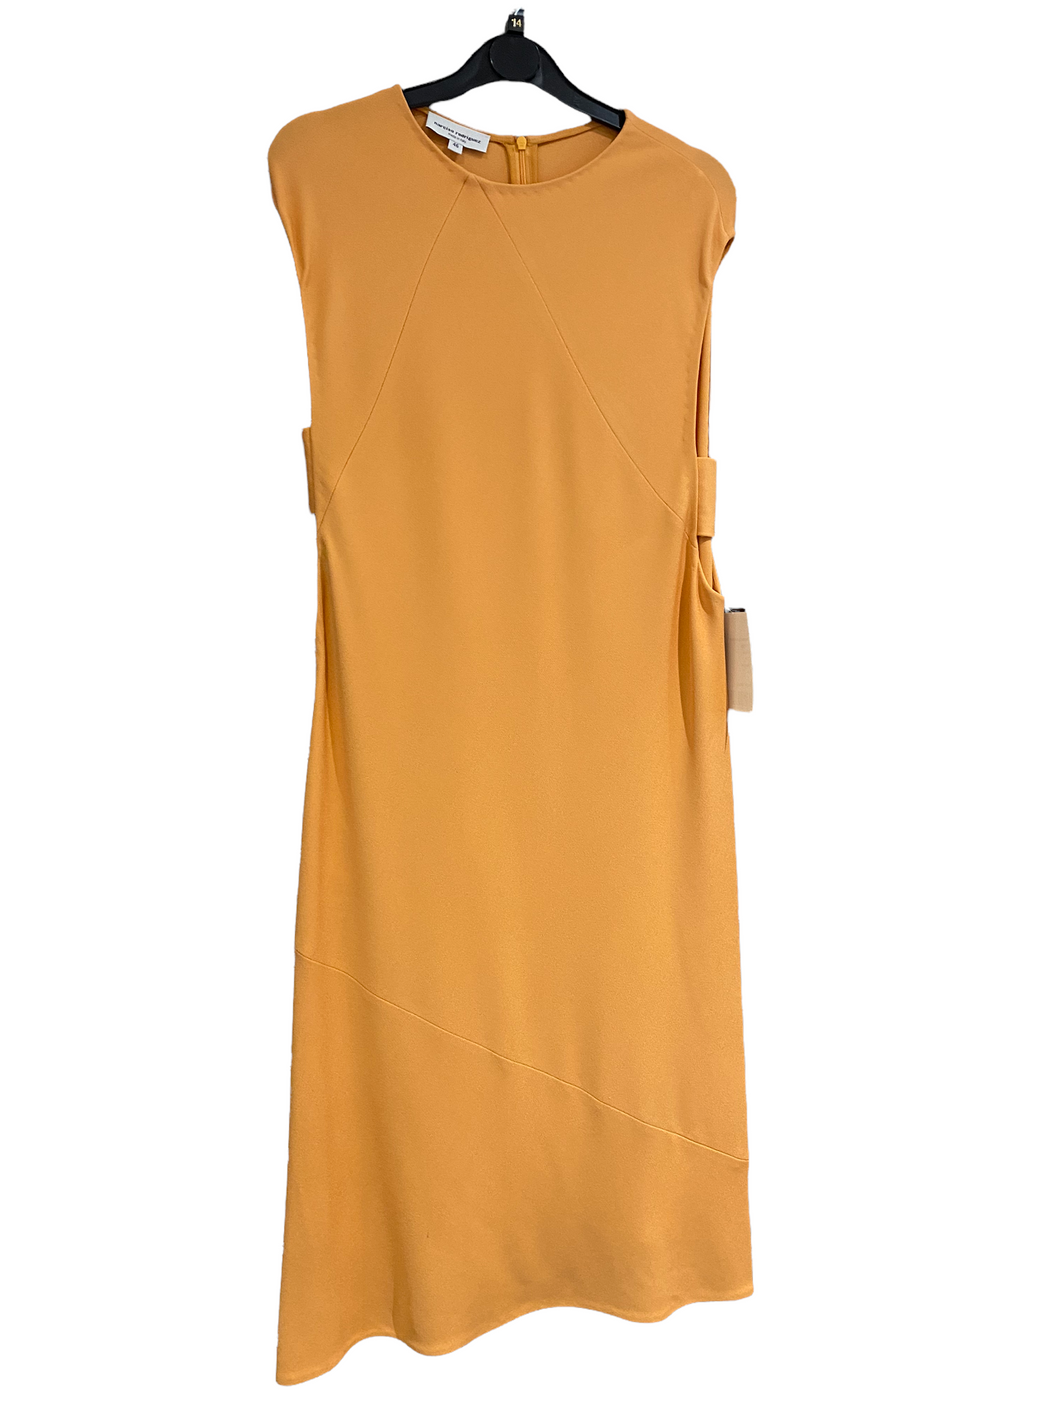 Narciso Rodriguez cut out crepe dress size 46